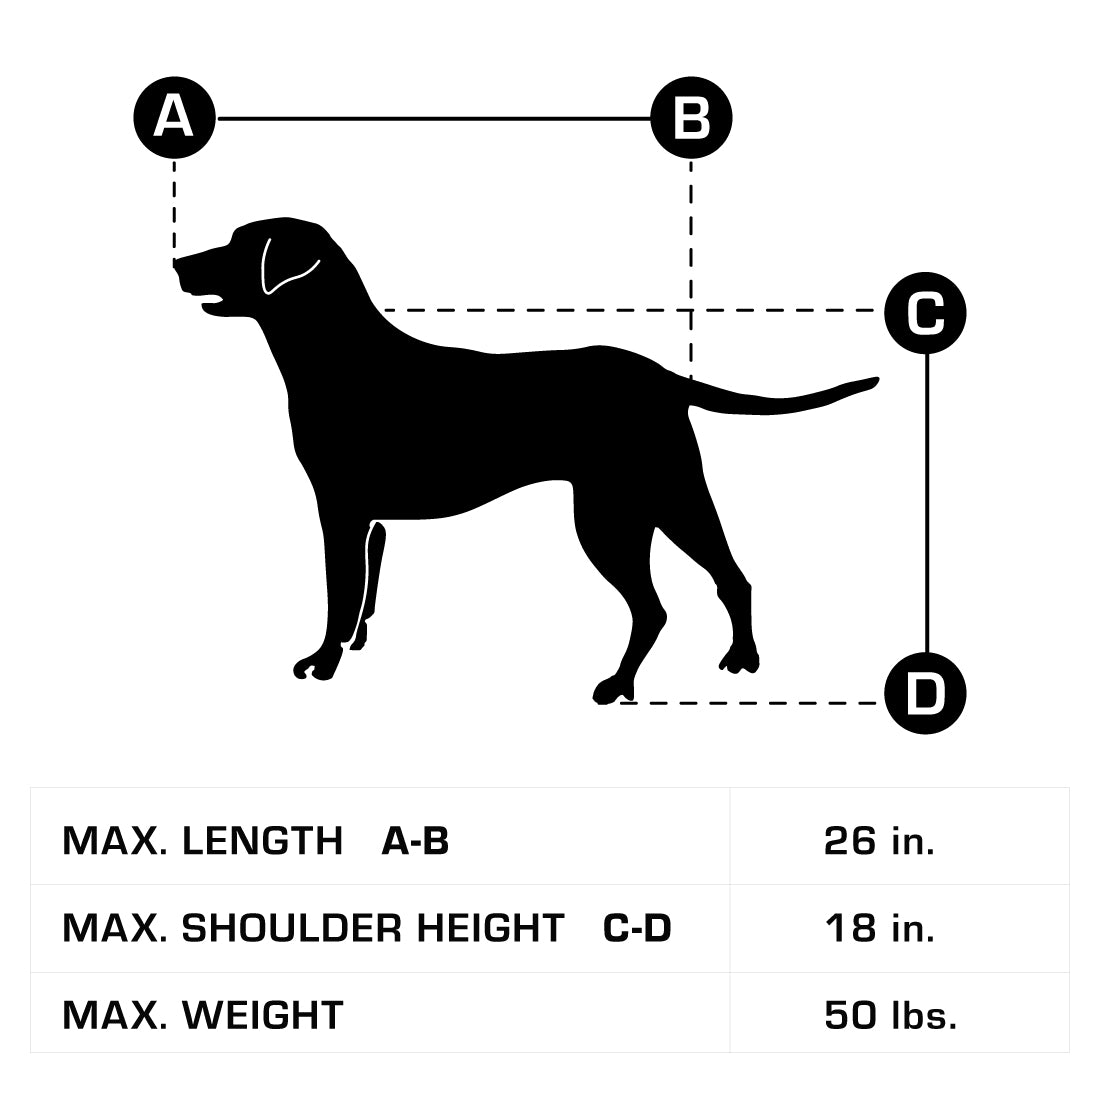 Pet trailer dog measurements can support 26 inch length, 18 inch height, & 50 lbs weight